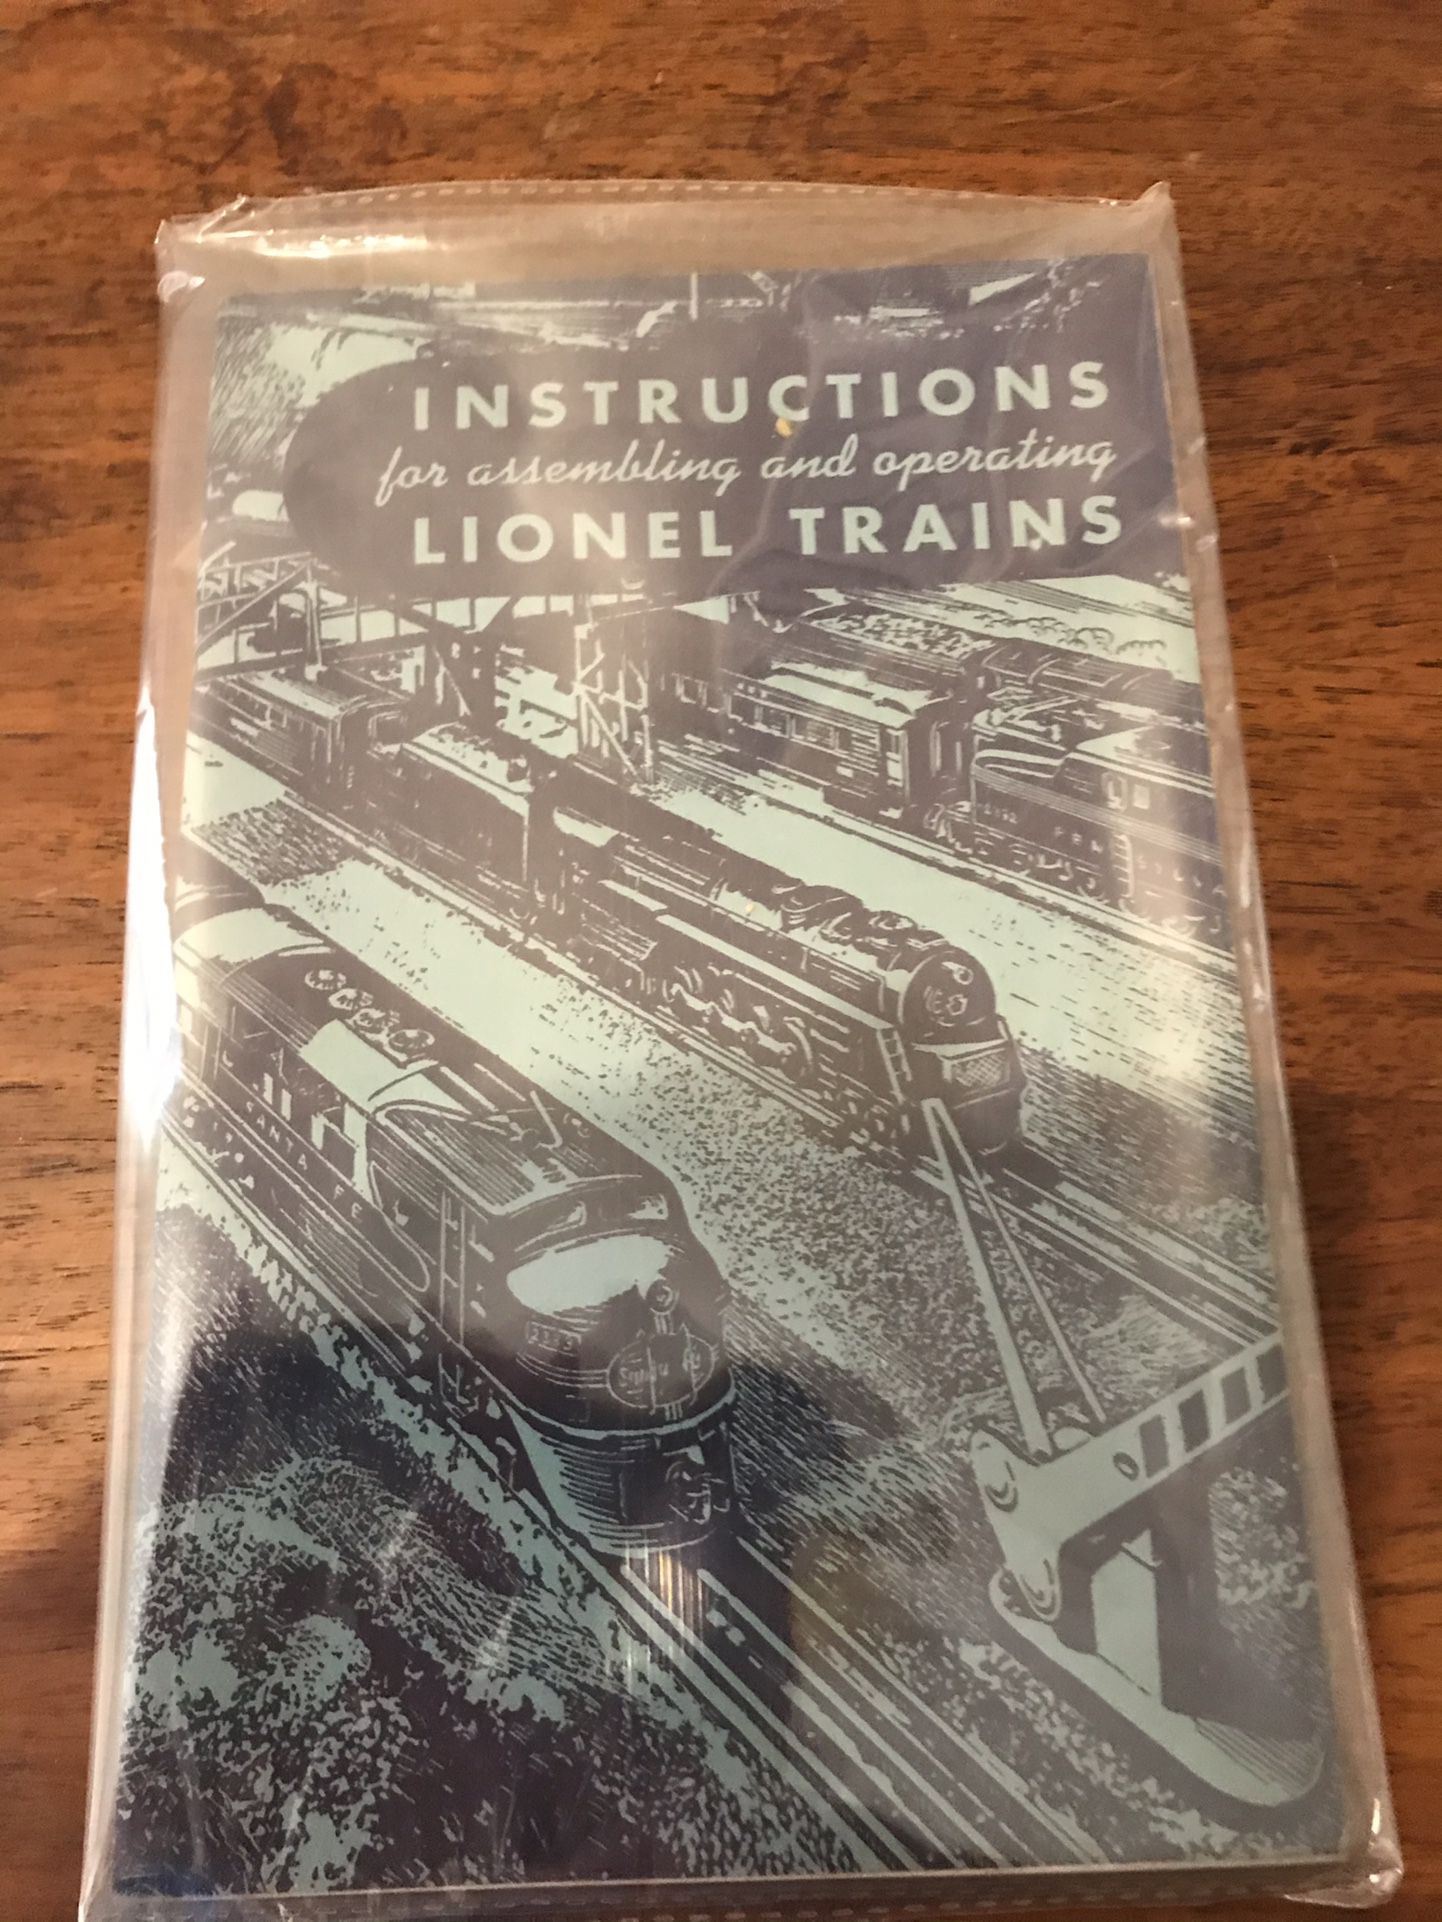 1949 Lionel Train Manual New and unopened very rare especially in this condition.